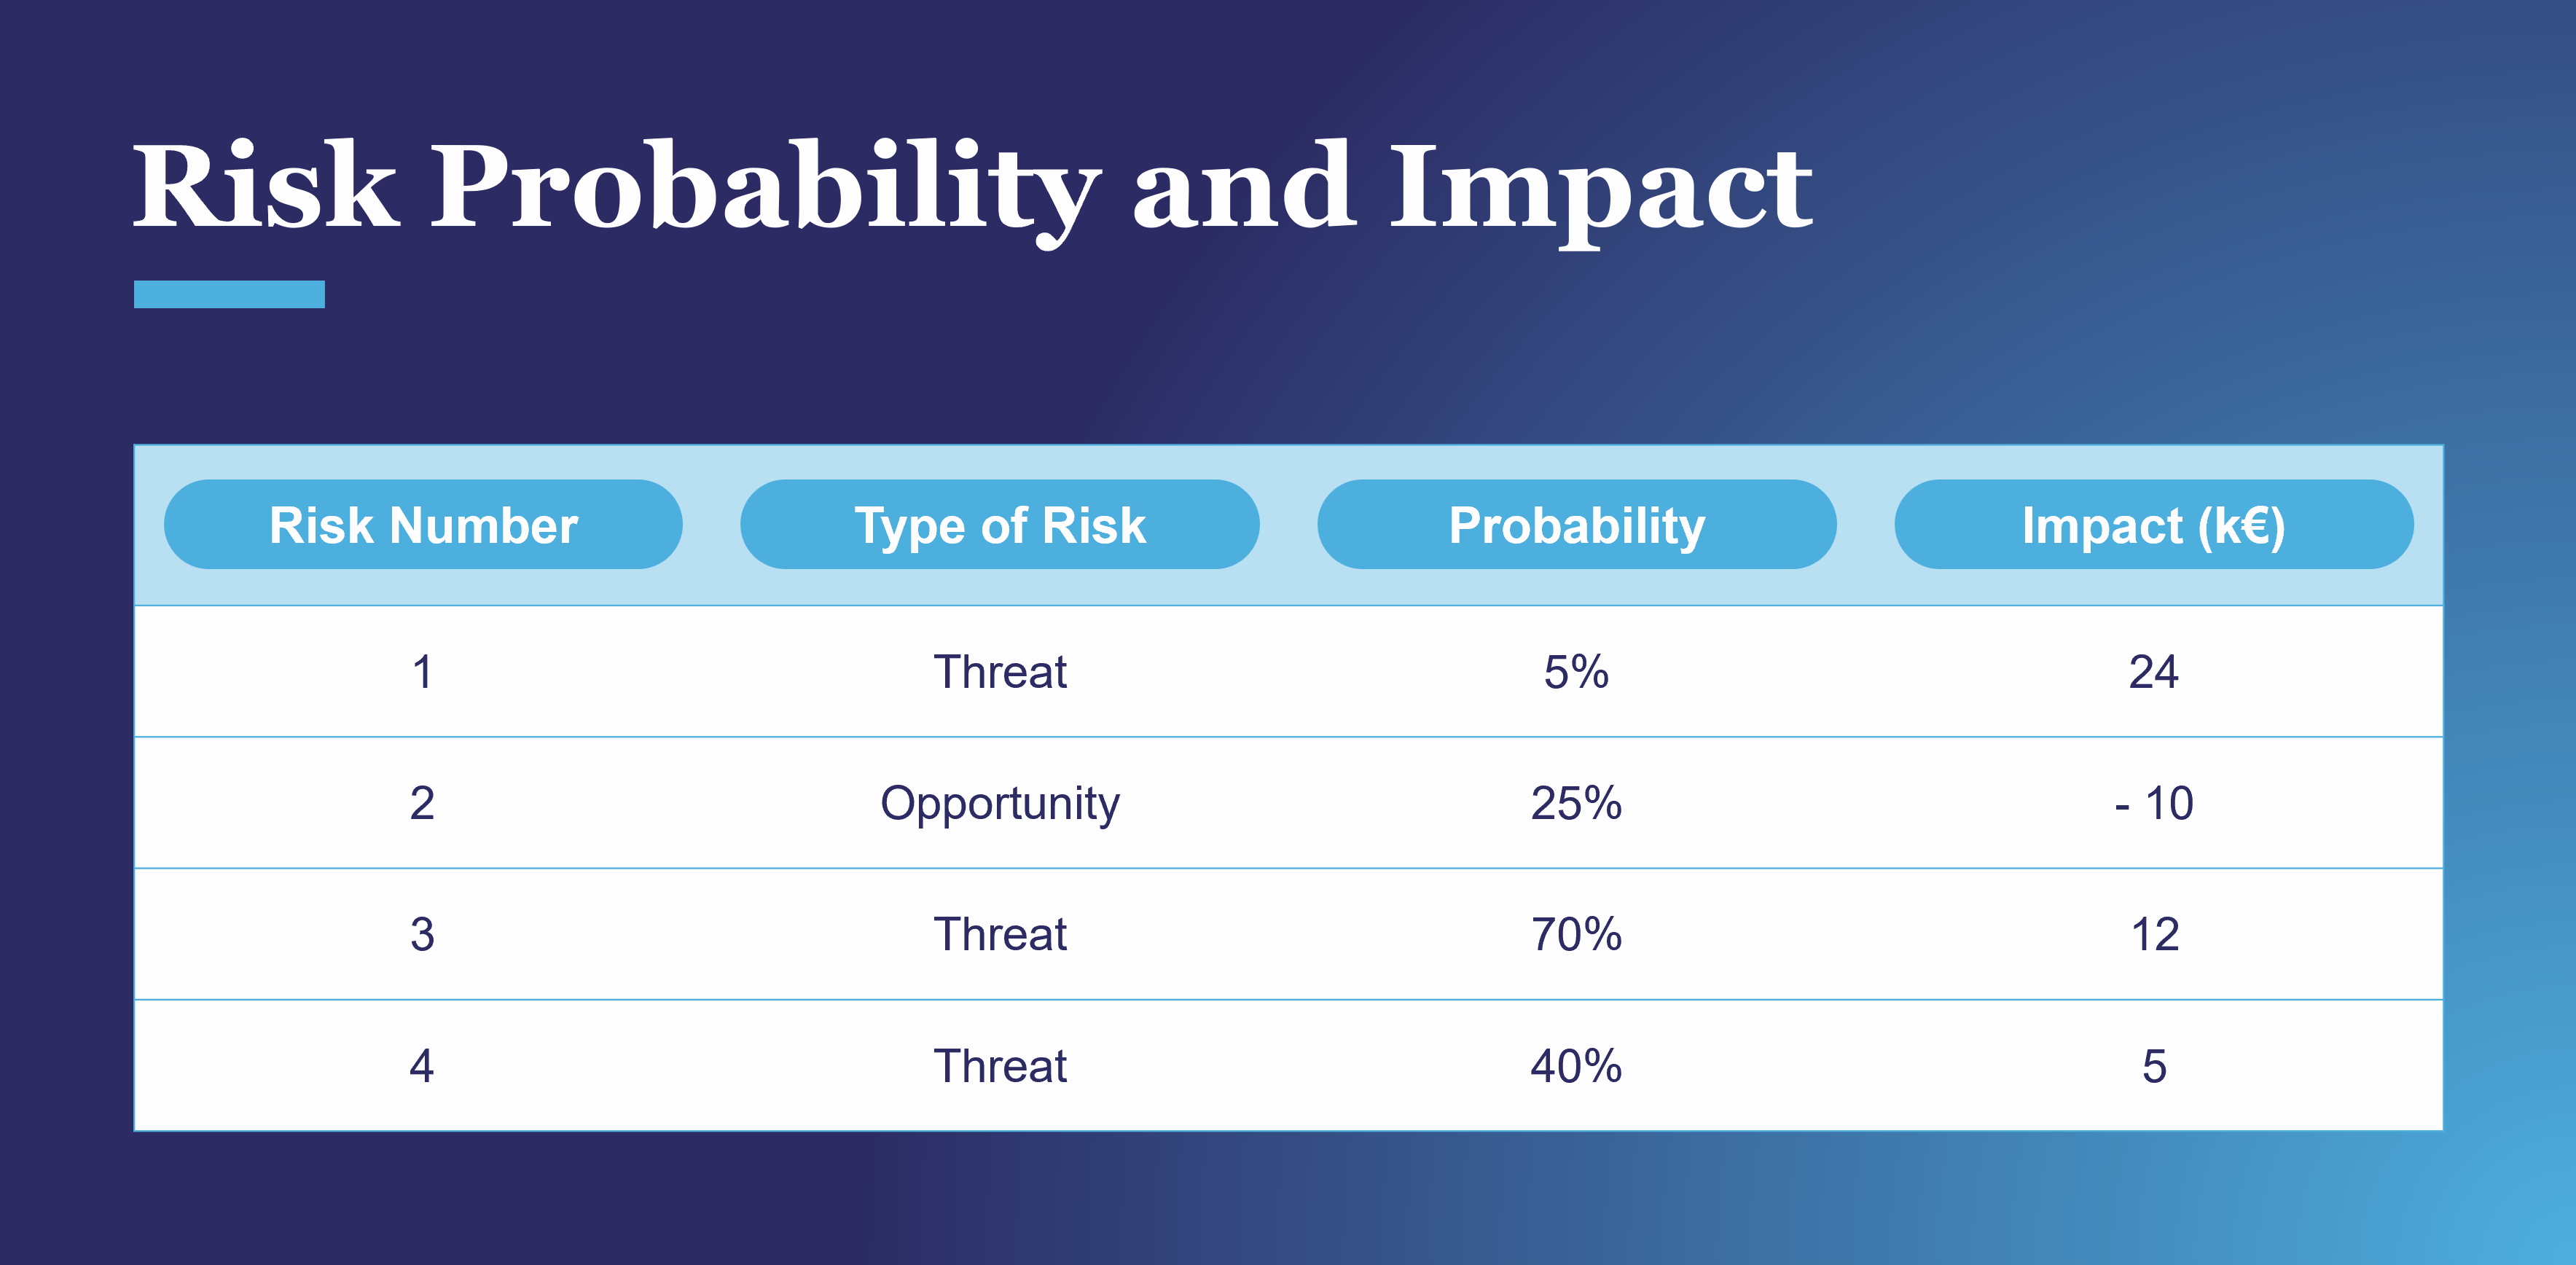 Evaluating the probability and impact of each risk